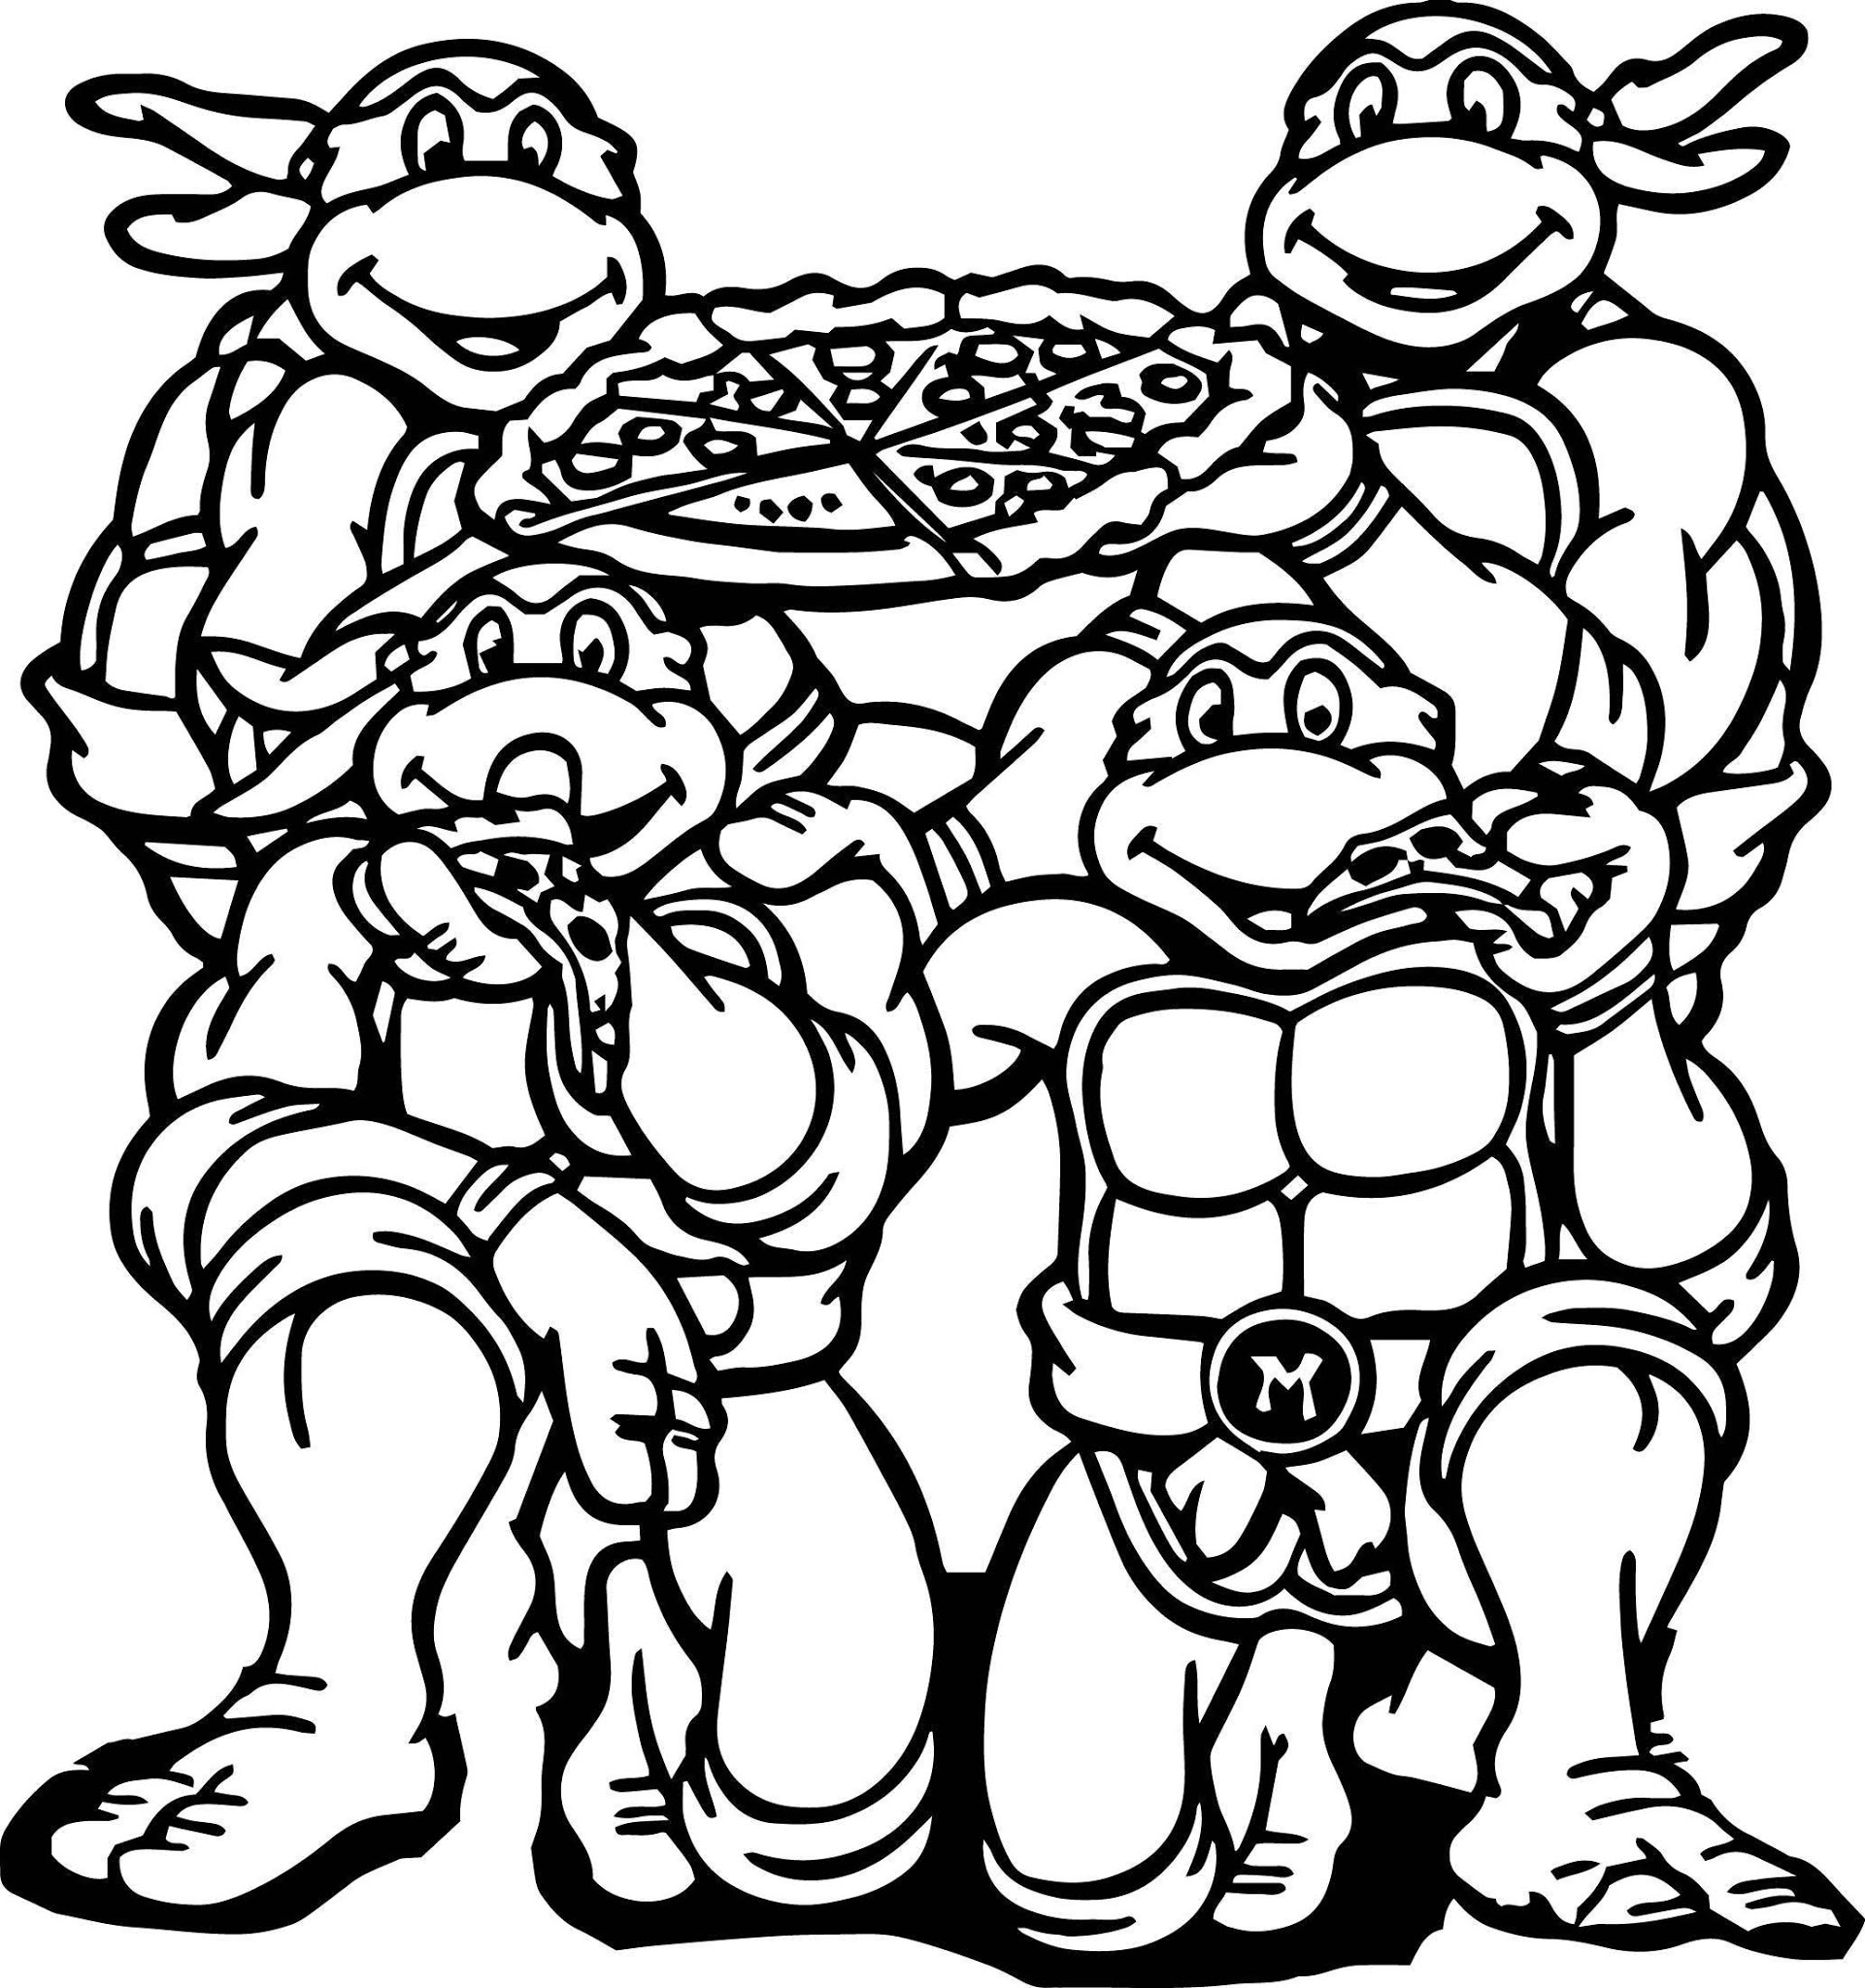 Ninja Turtles Coloring Page Coloring Pages